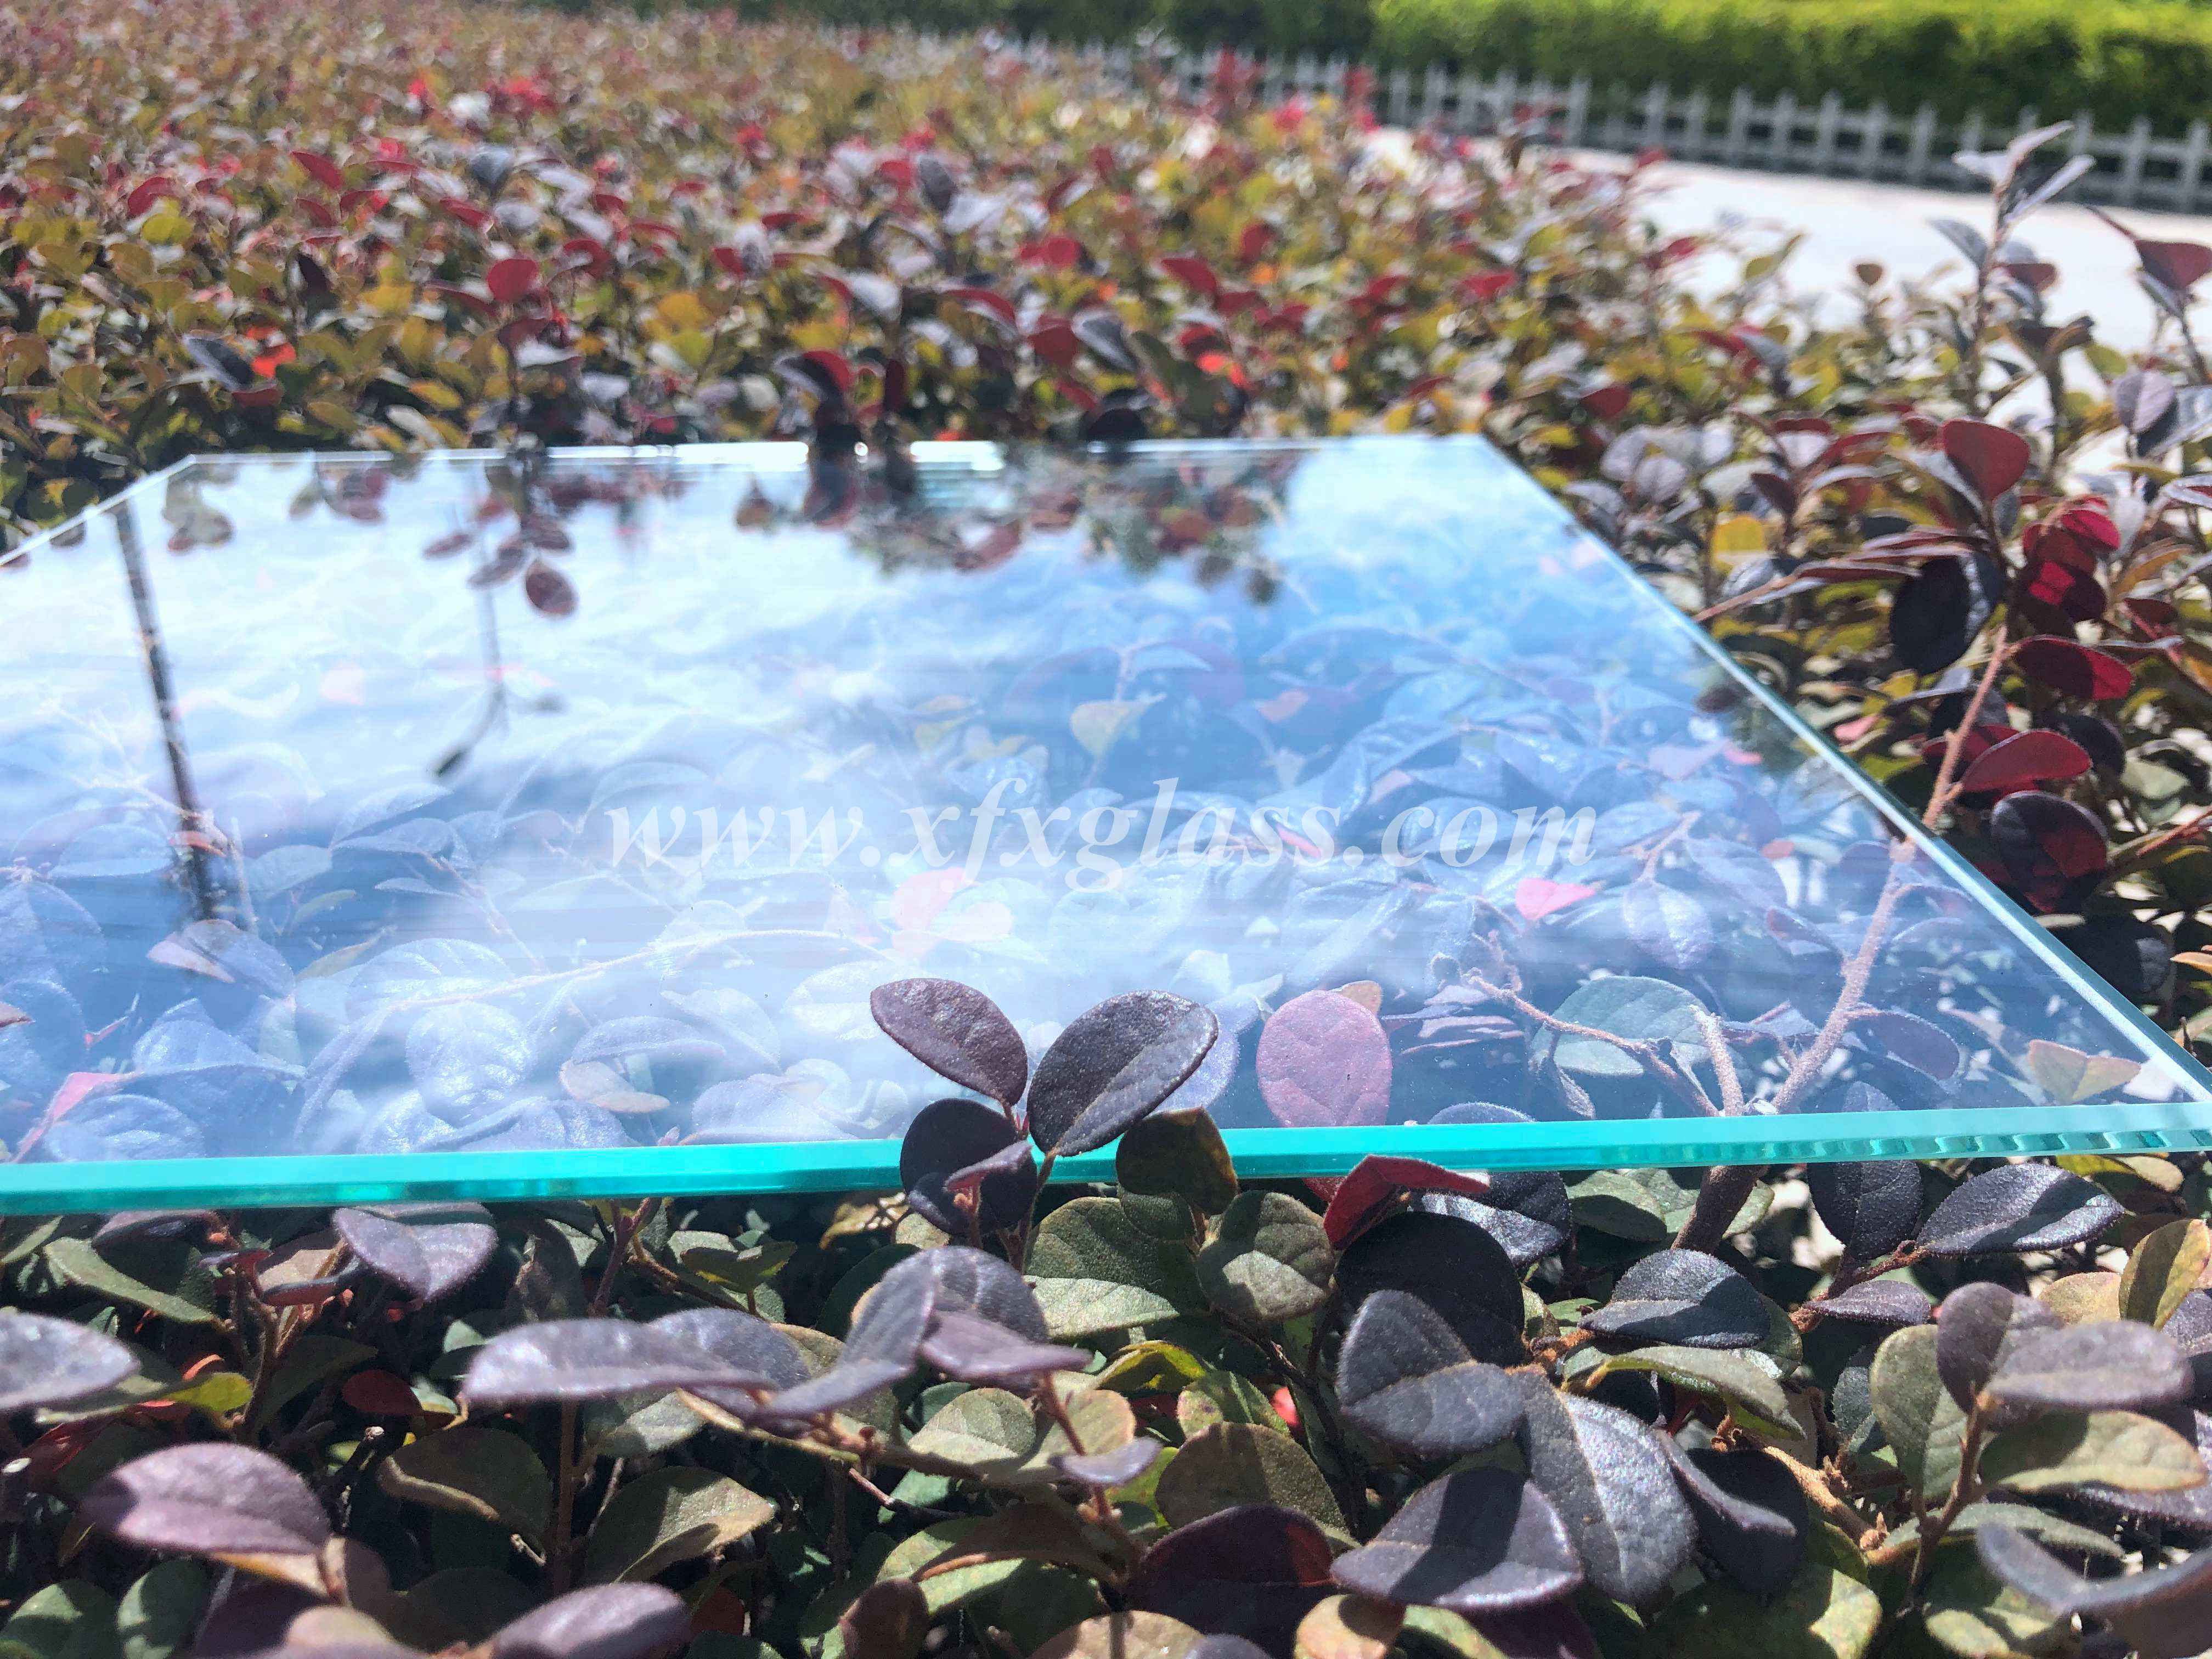 3-12mm Clear Float Glass for building and project etc.